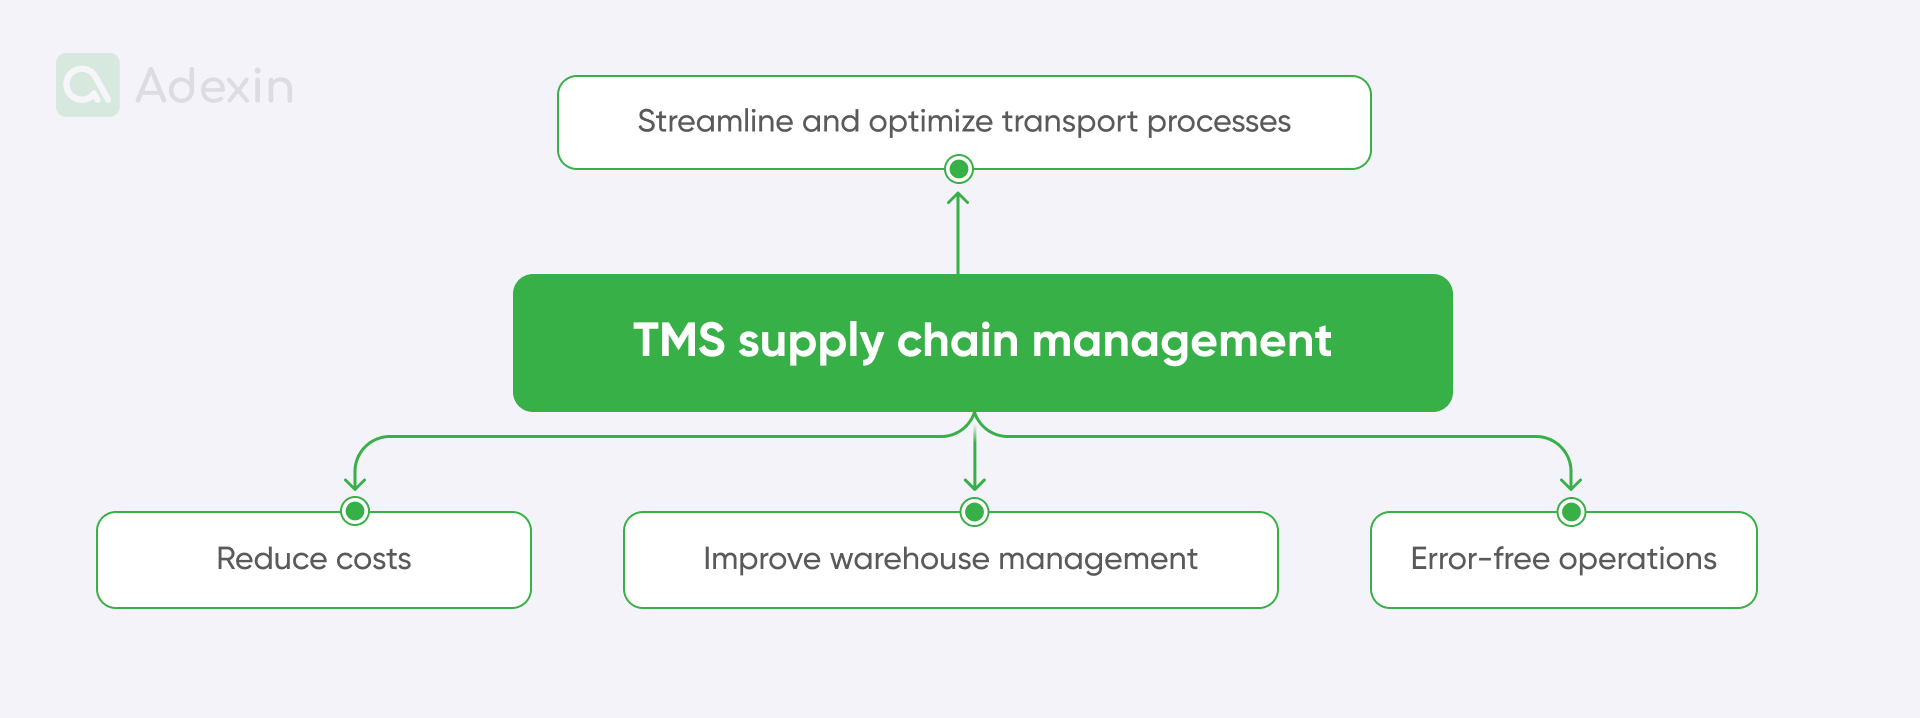 Areas of TMS supply chain management